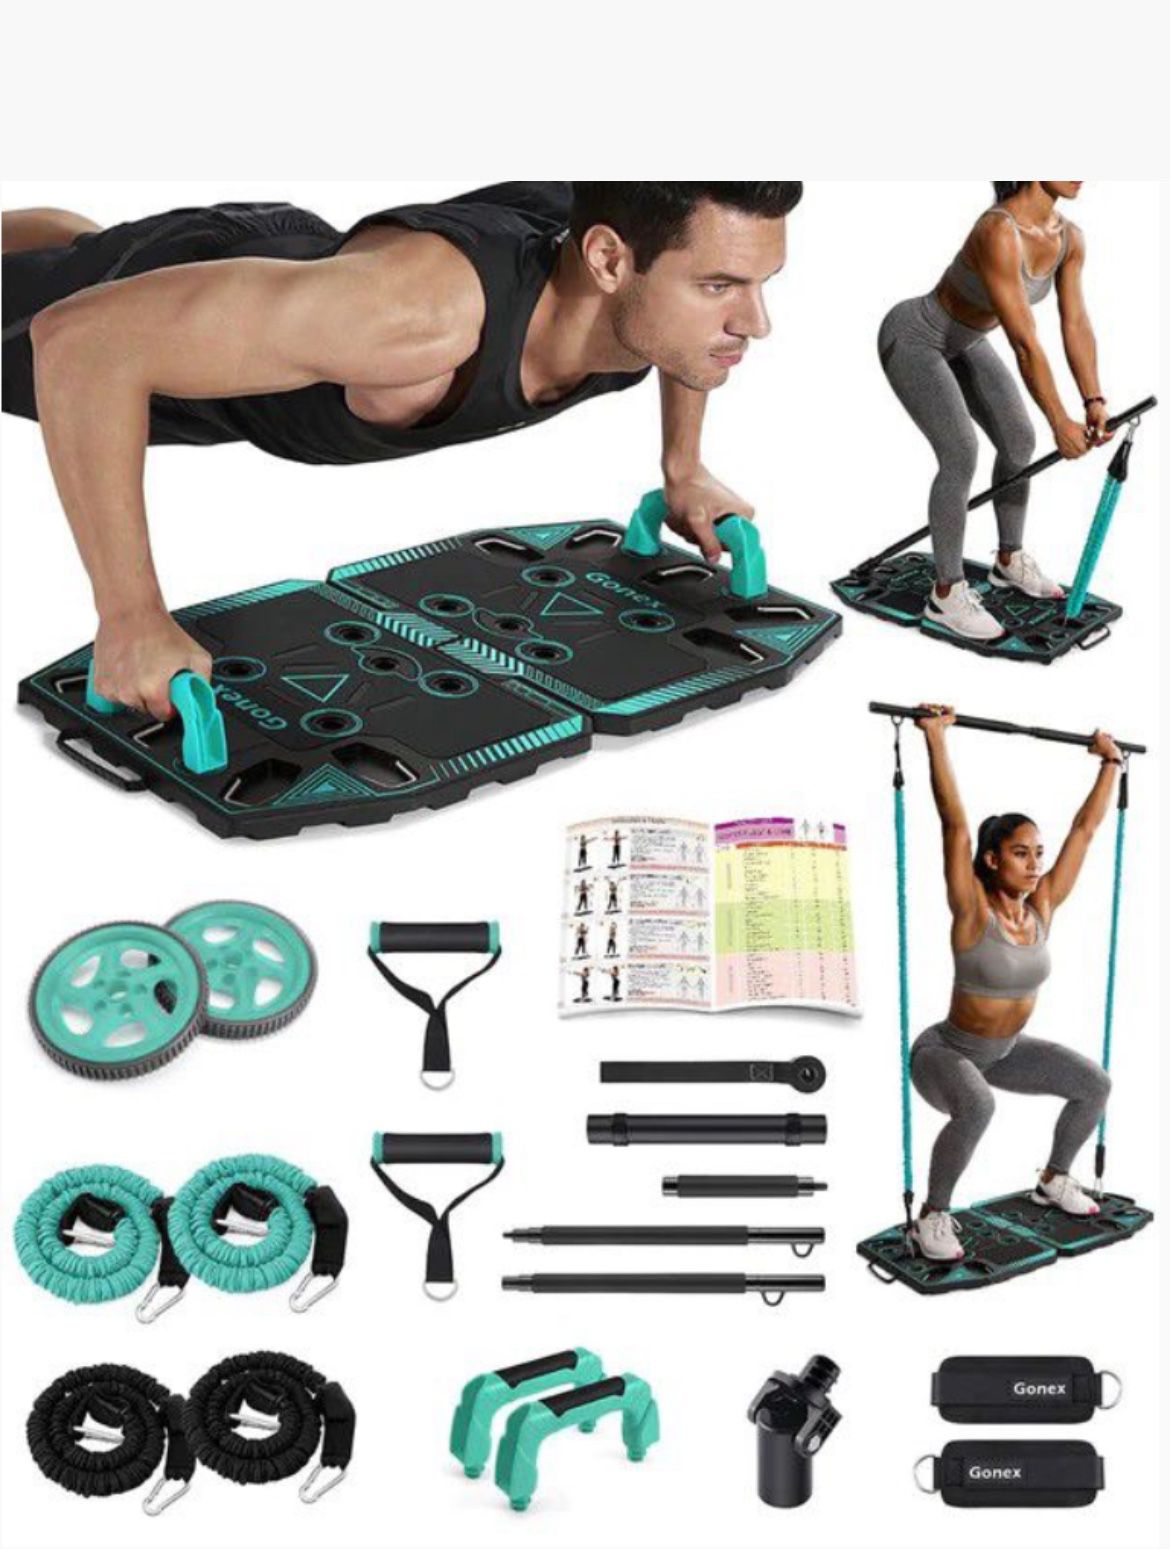 Workout Equipment with 14 Exercise Accessories Ab Roller Wheel